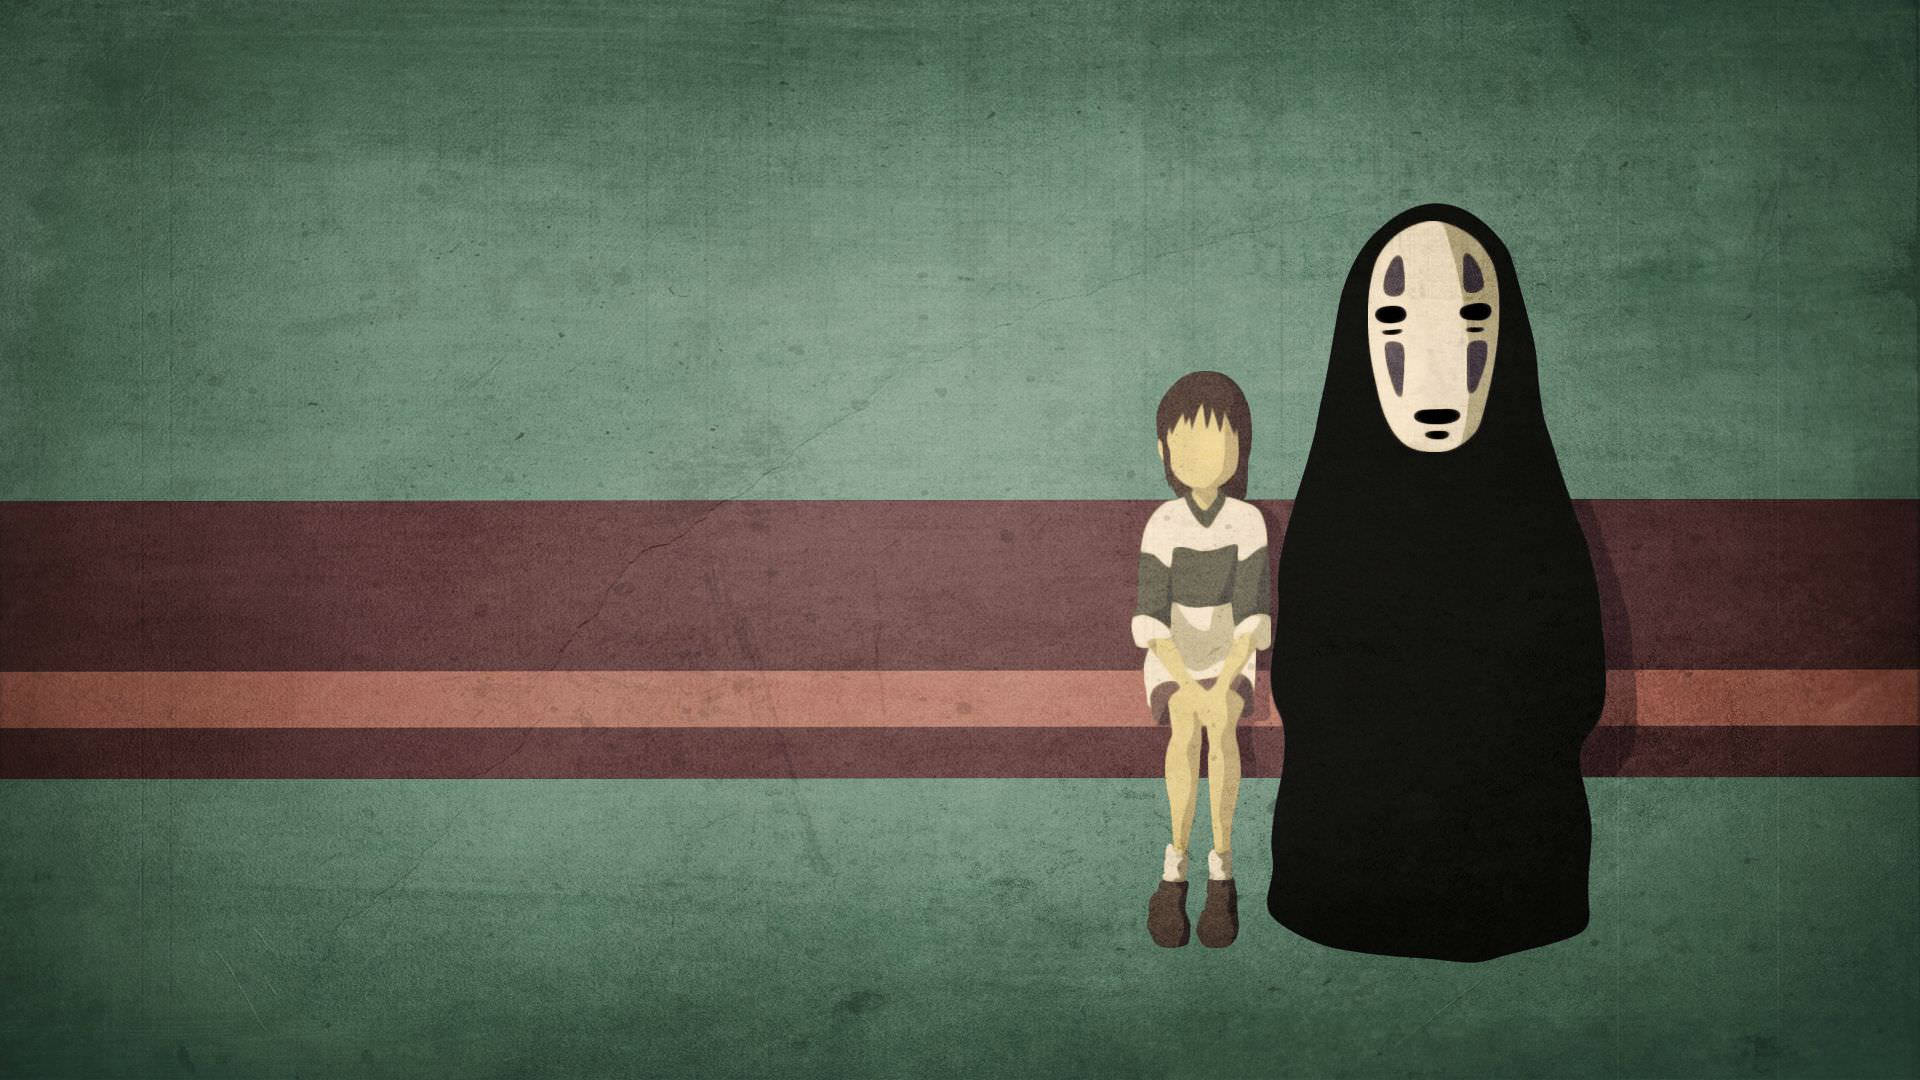 No Face and Chihiro from the beloved animated film, Spirited Away Wallpaper